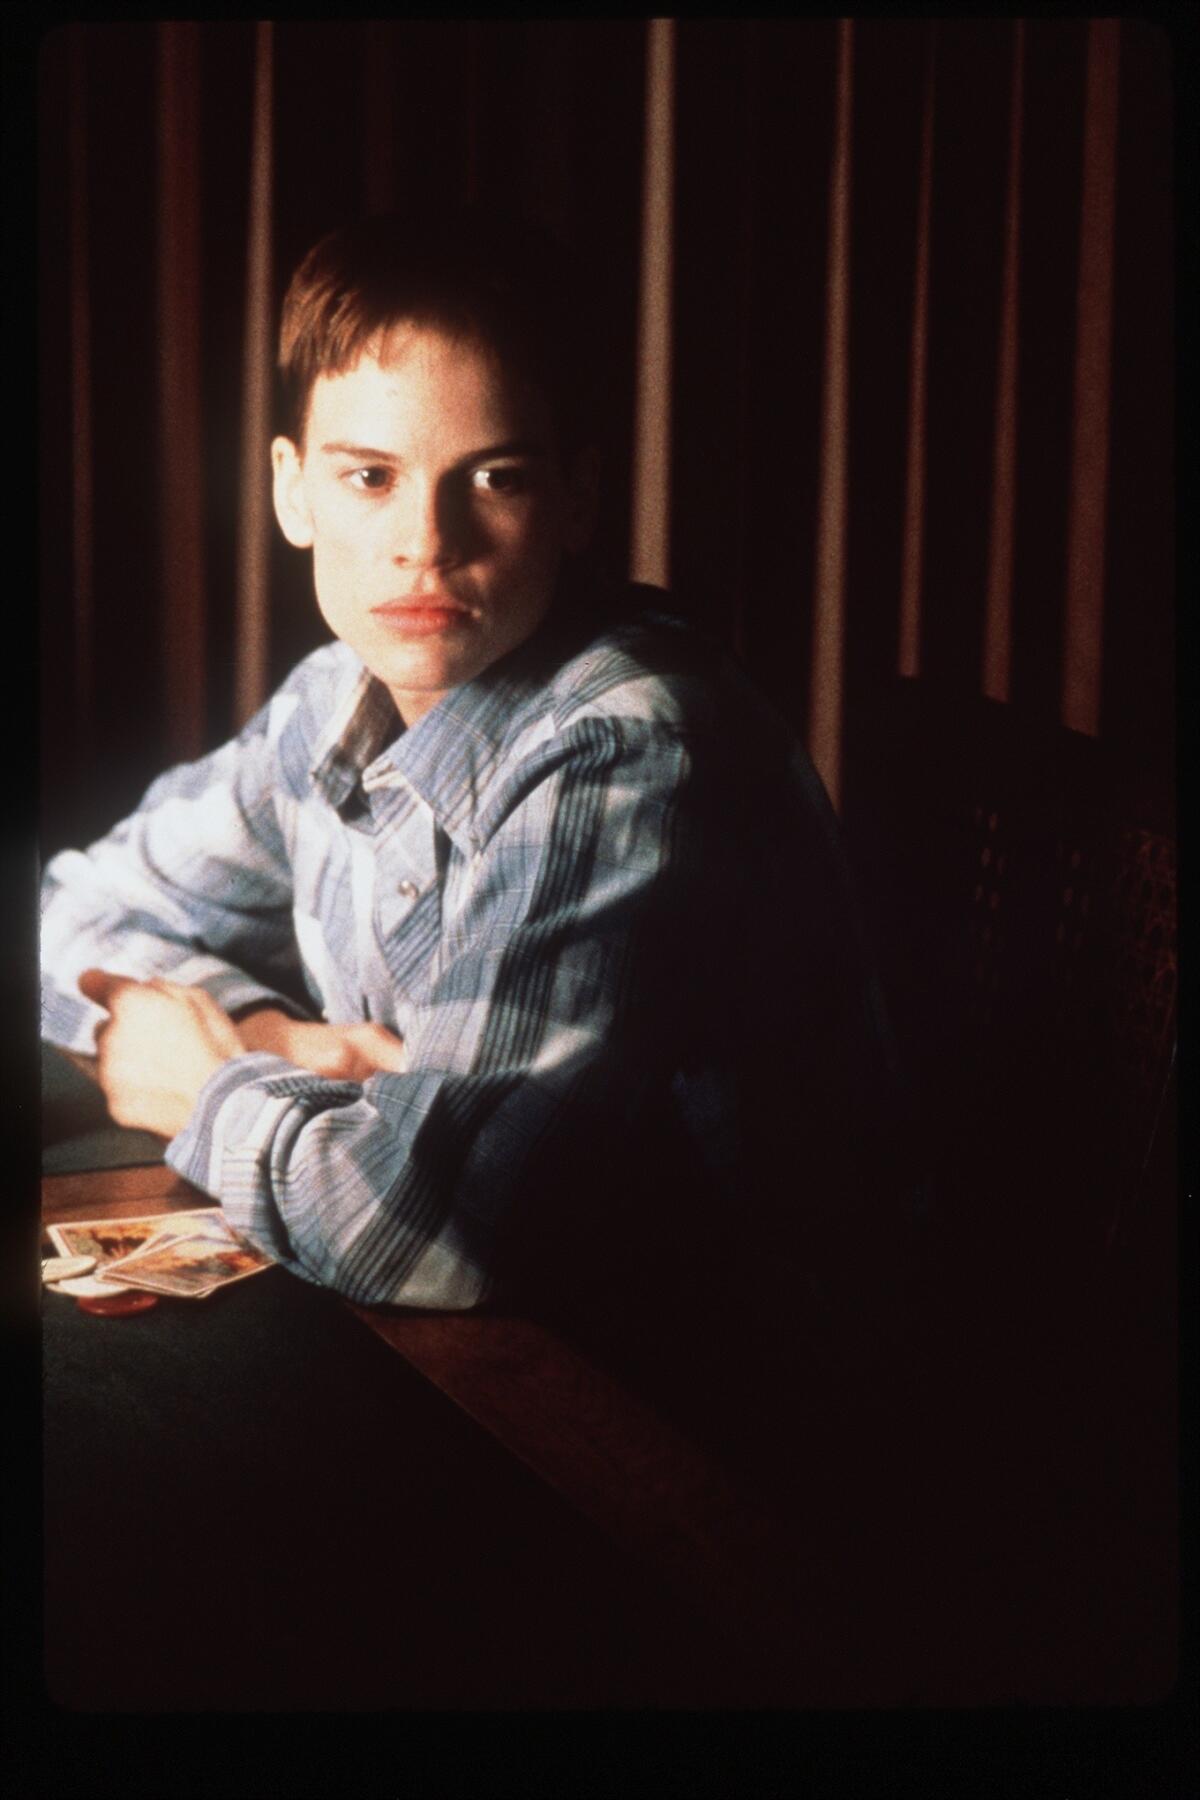 Hilary Swank played a transgender man in "Boys Don't Cry," directed by Kimberly Peirce. (Bill Matlock / Fox Searchlight Pictures)